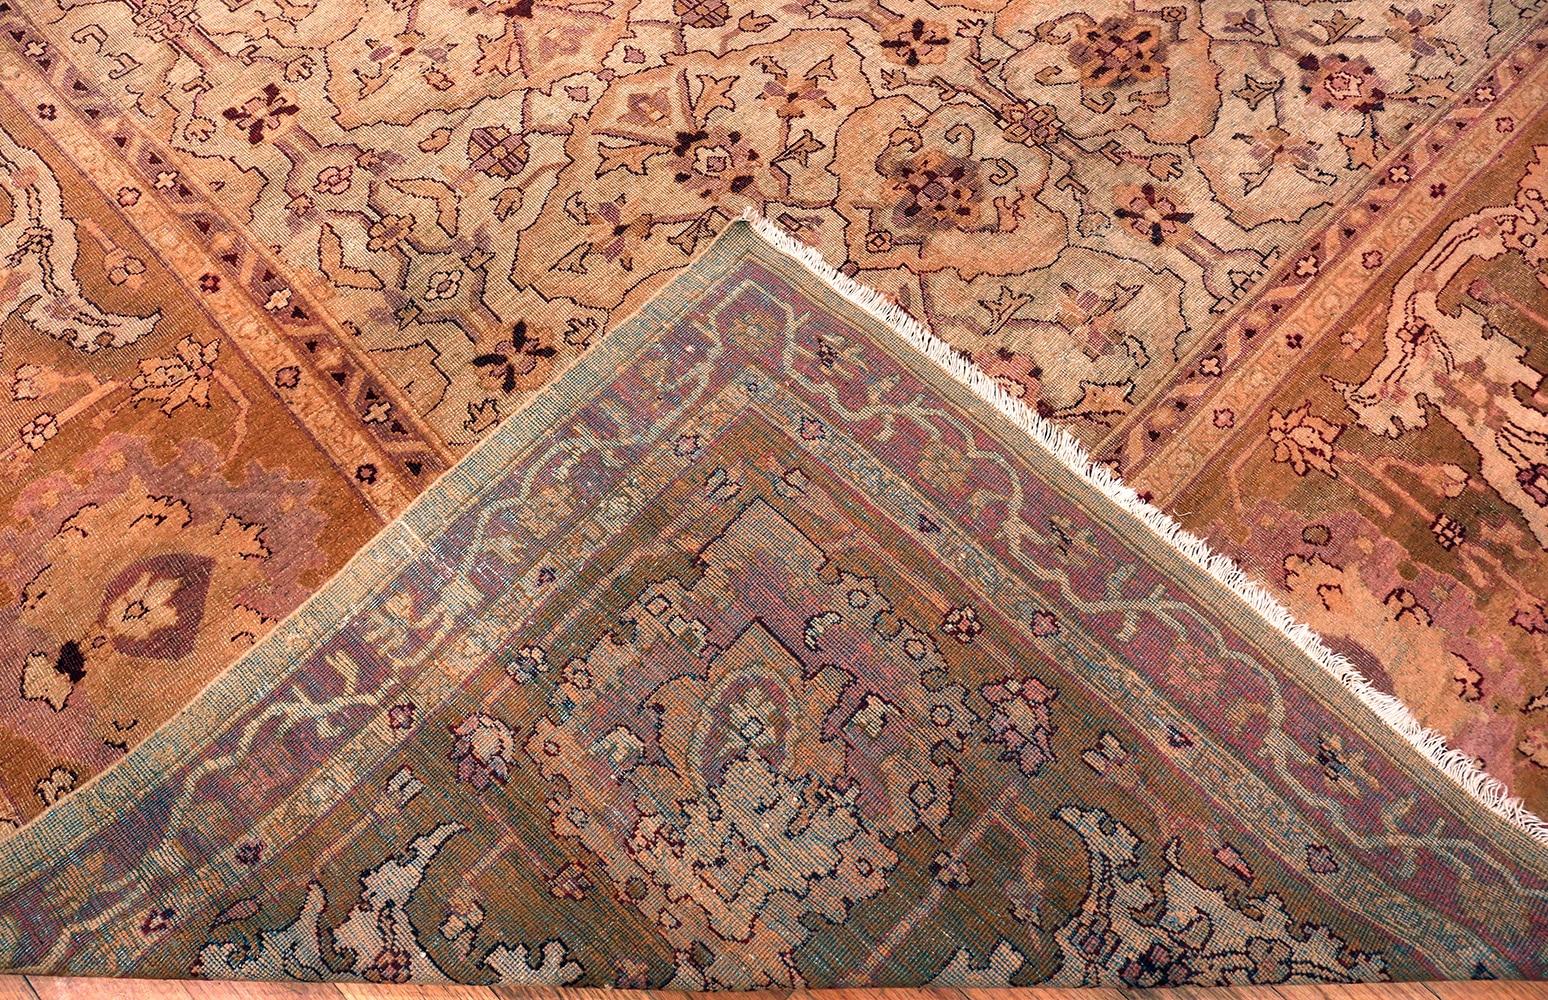 A gorgeous antique oversized Indian Amritsar rug with beautiful floral patterns, Country of Origin / Rug Type: Indian Rugs, Circa date: 1900. Size: 12 ft 10 in x 22 ft 6 in (3.91 m x 6.86 m)

